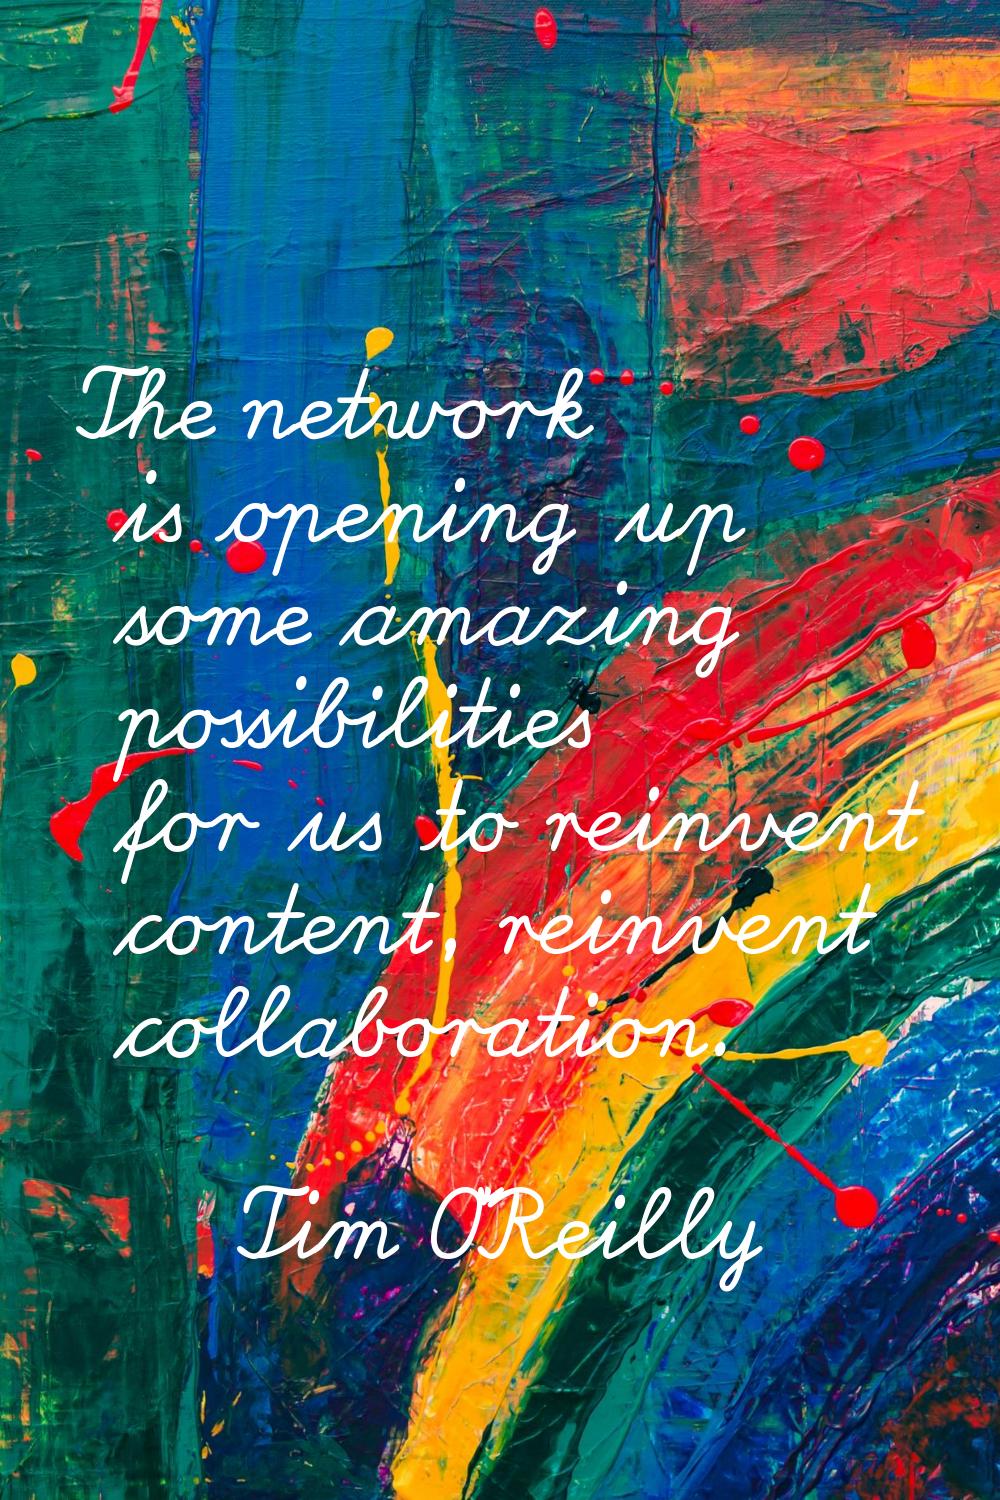 The network is opening up some amazing possibilities for us to reinvent content, reinvent collabora